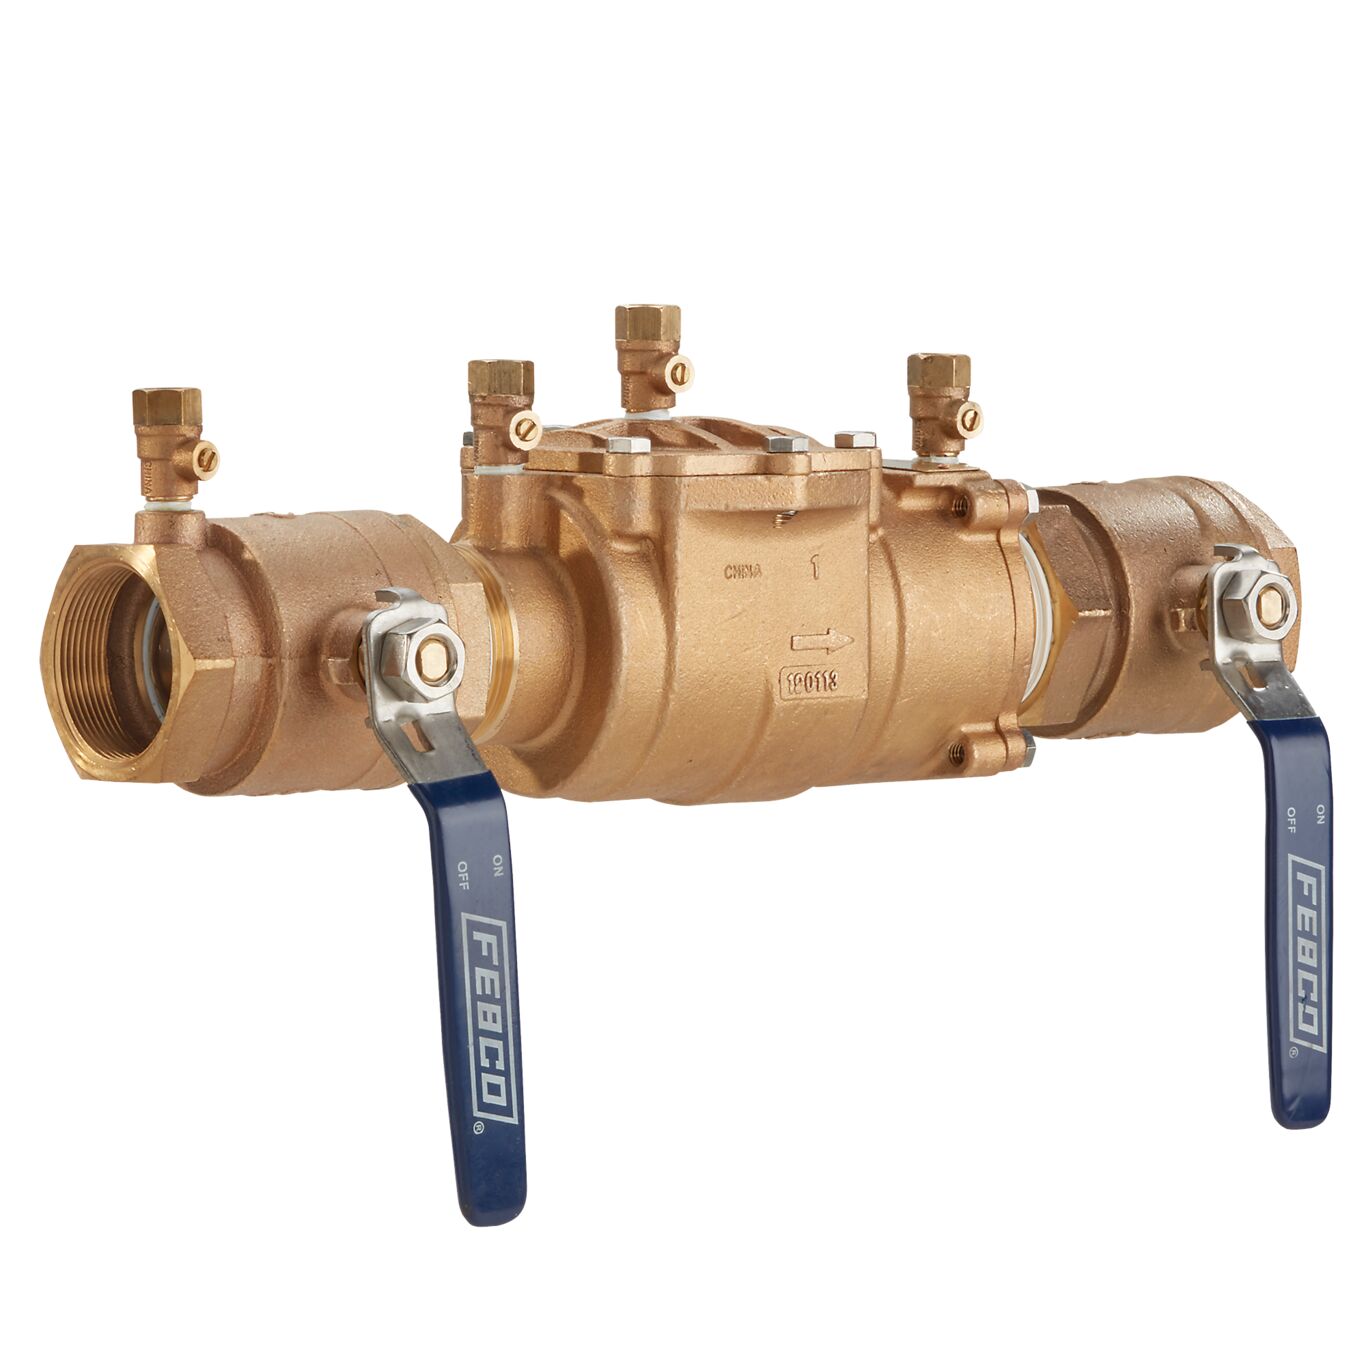 FEBCO - 1116 - Double Check Valve Assembly Model 850 2 in. Bronze With Ball Valves